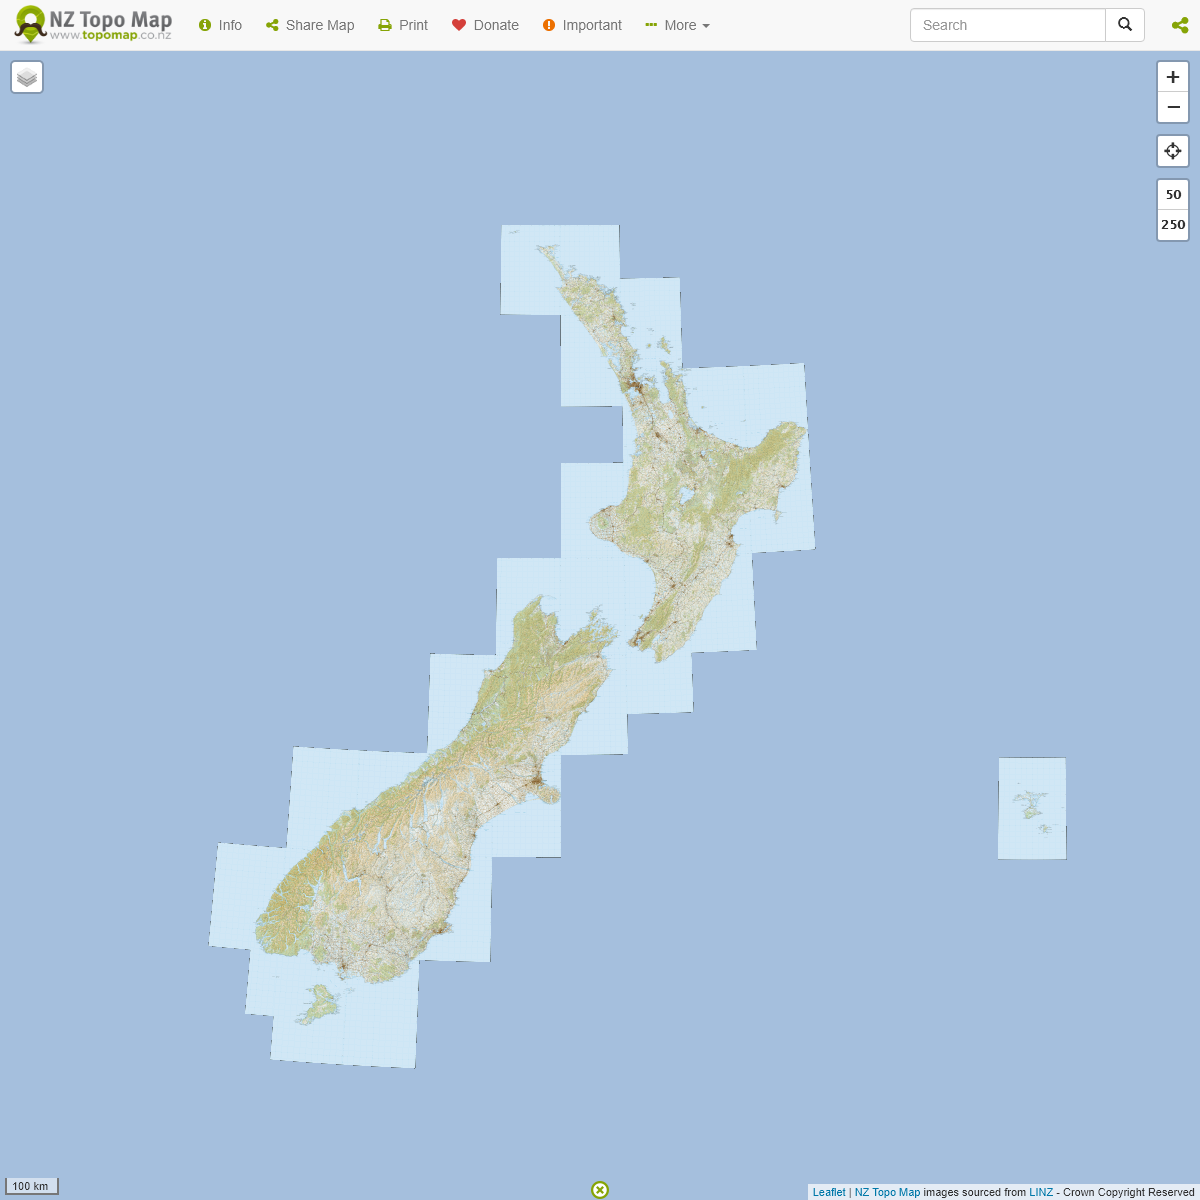 A complete backup of topomap.co.nz